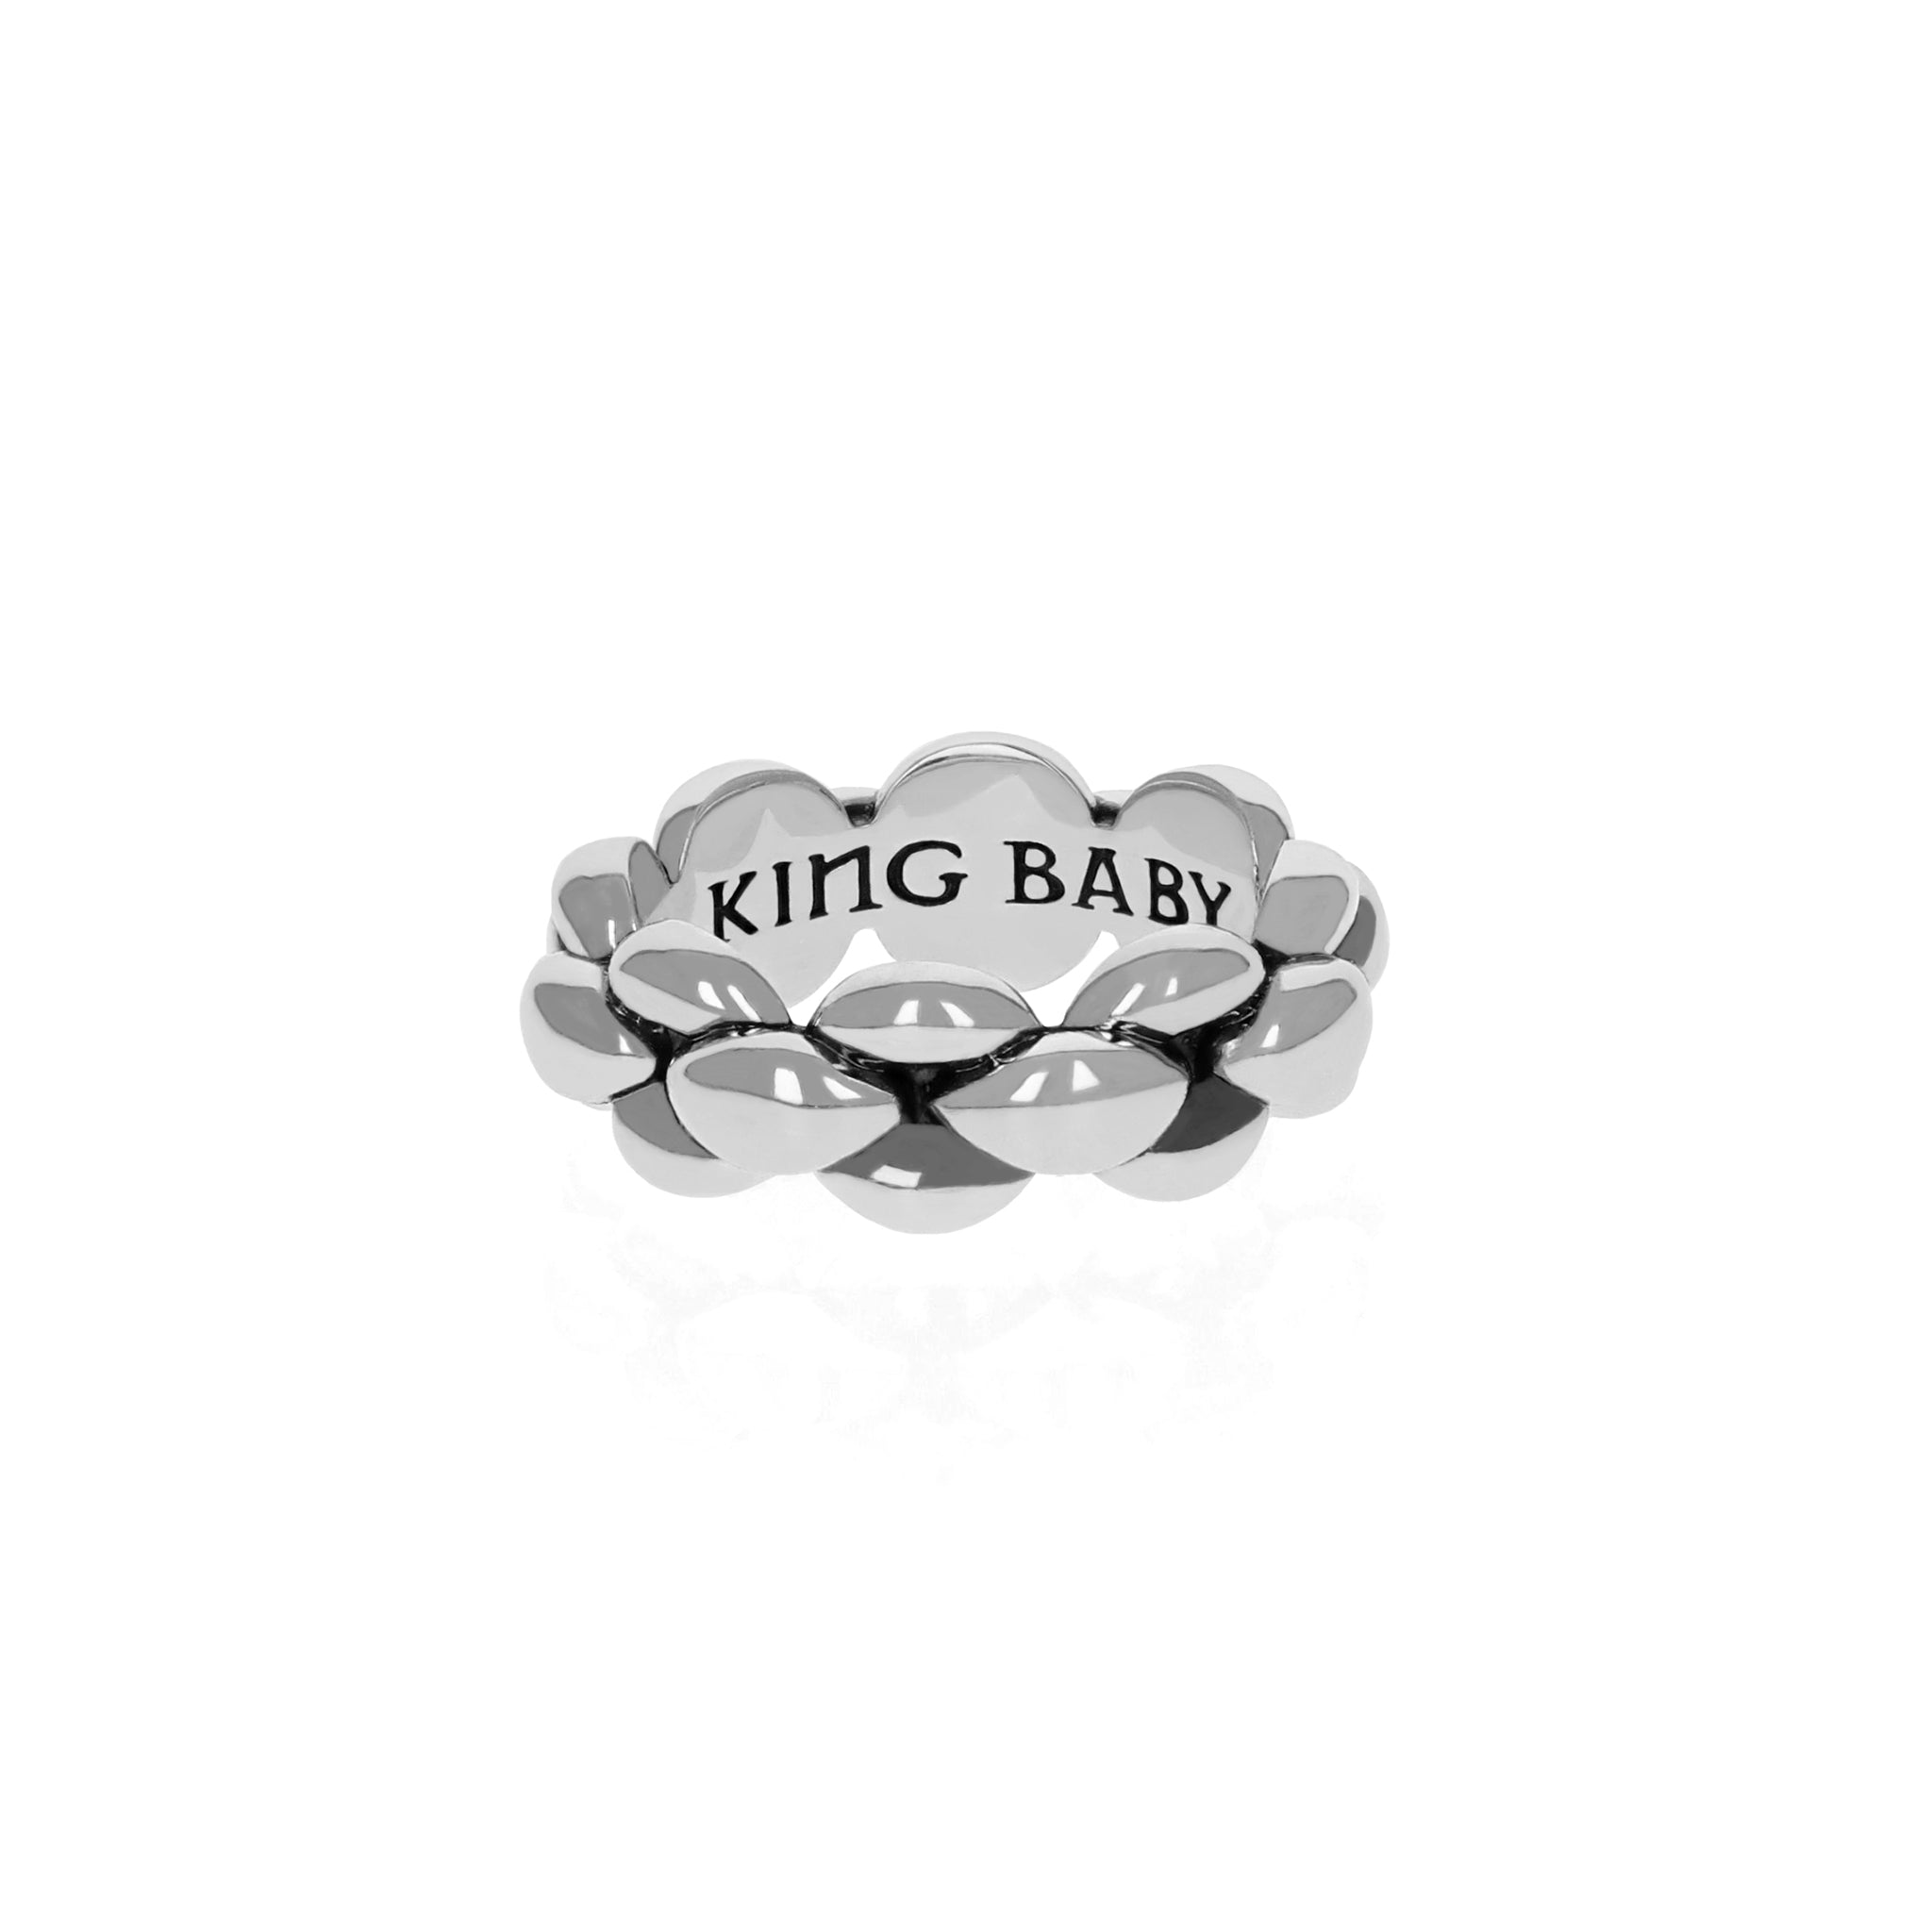 Photo of silver infinity link ring with King Baby Logo on inside of band